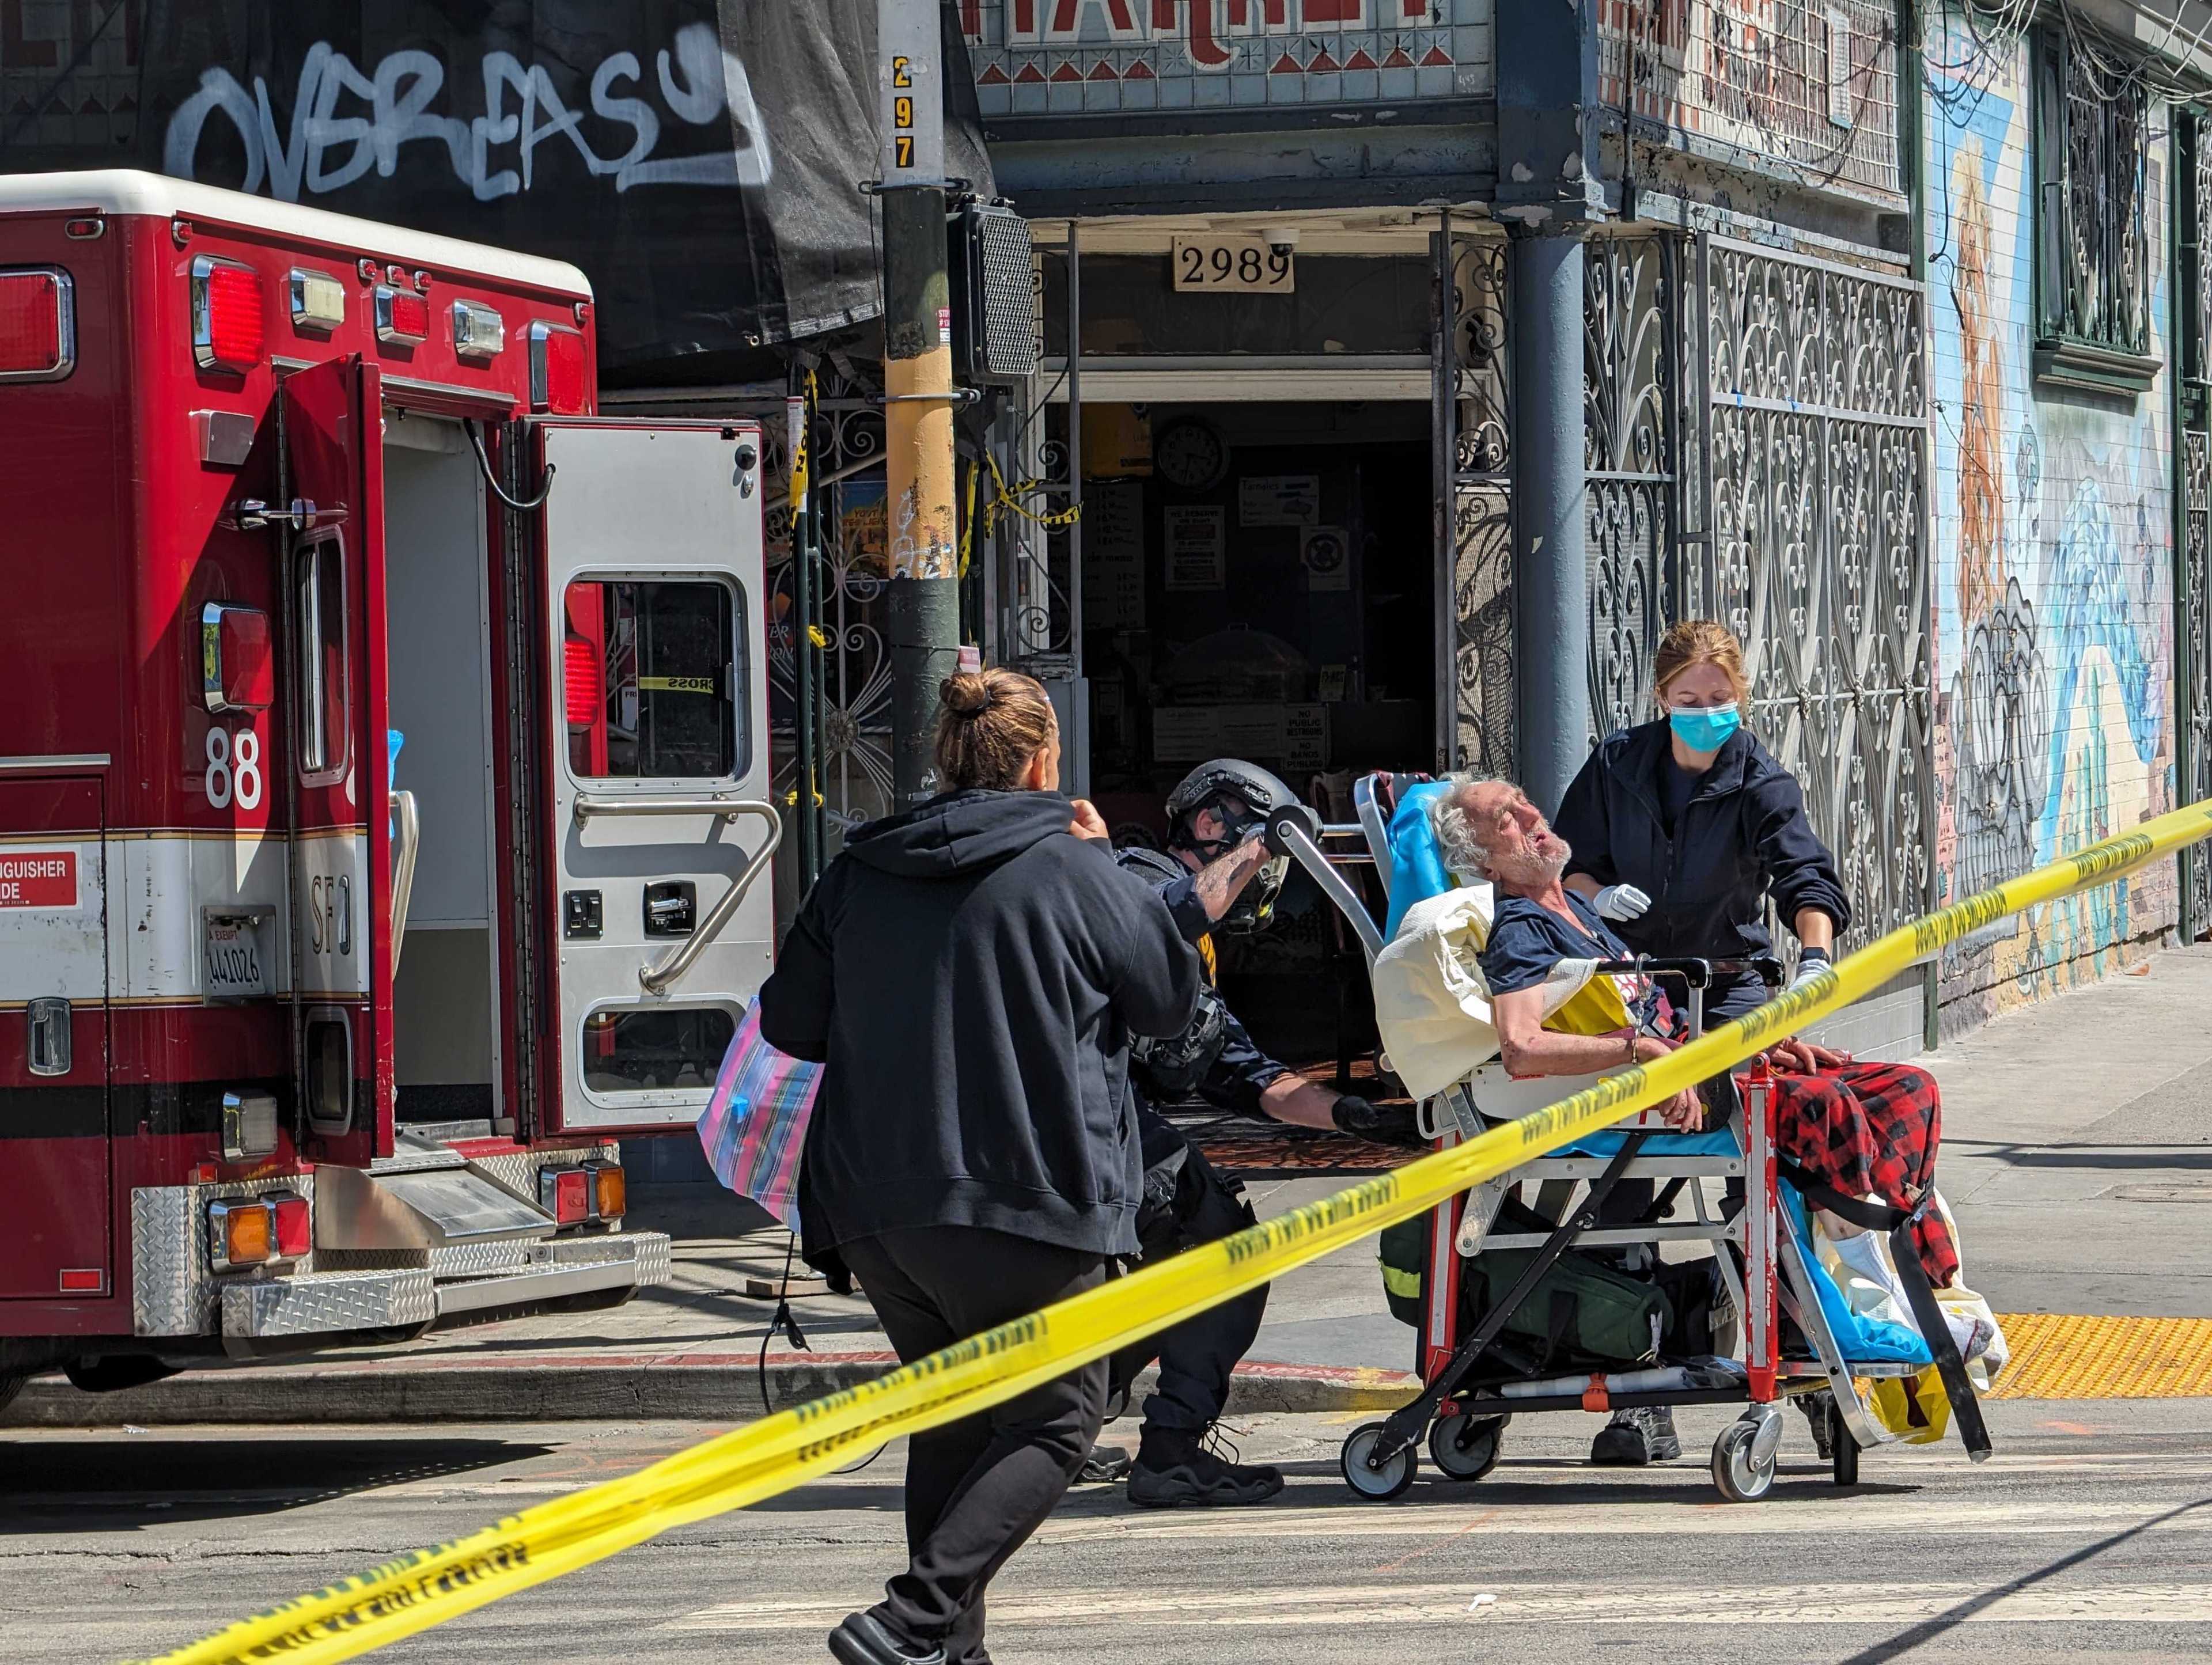 In this image, paramedics assist an elderly man on a stretcher near a red ambulance on a city street. The area is cordoned off with yellow tape, and graffiti is visible.